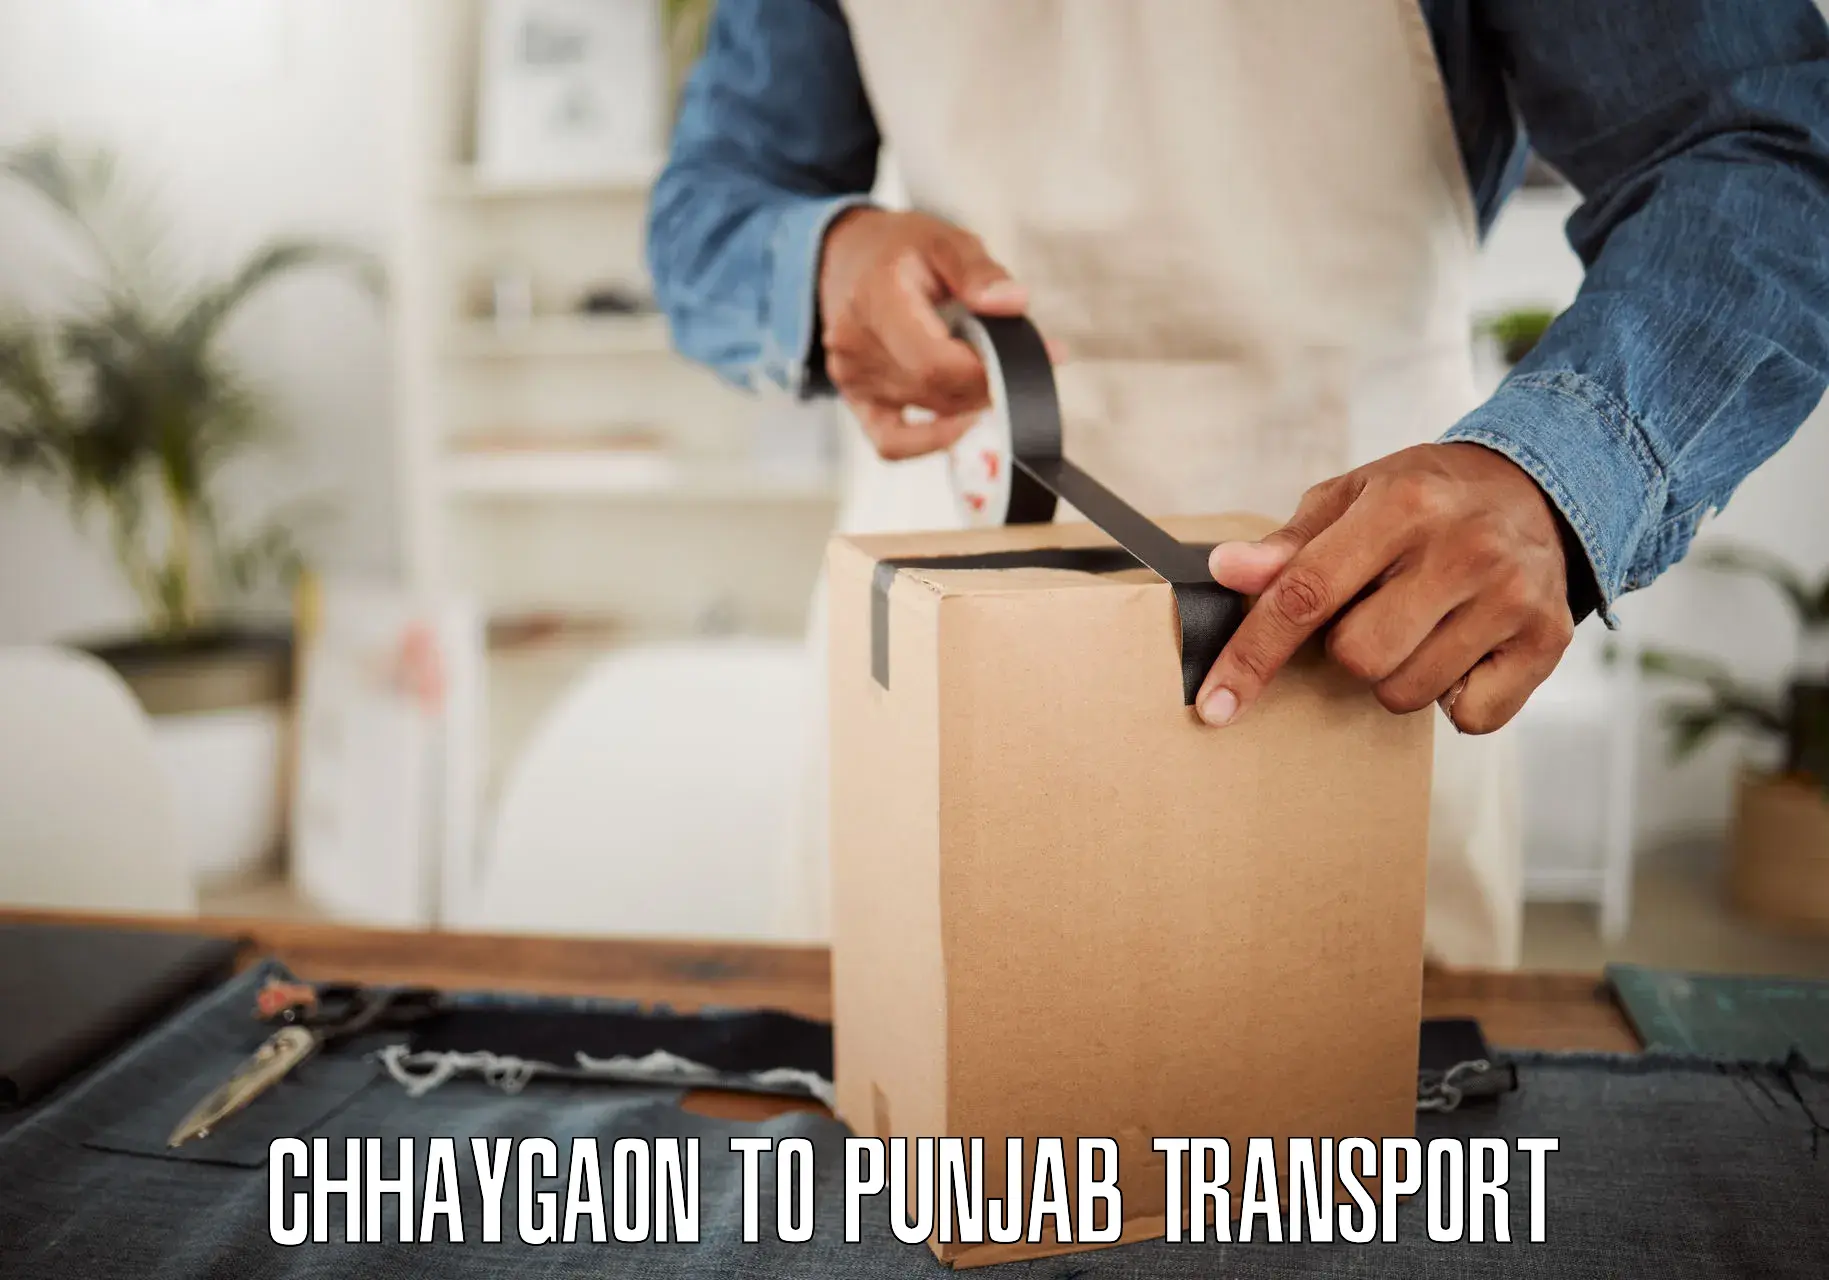 Cargo transportation services Chhaygaon to Jagraon